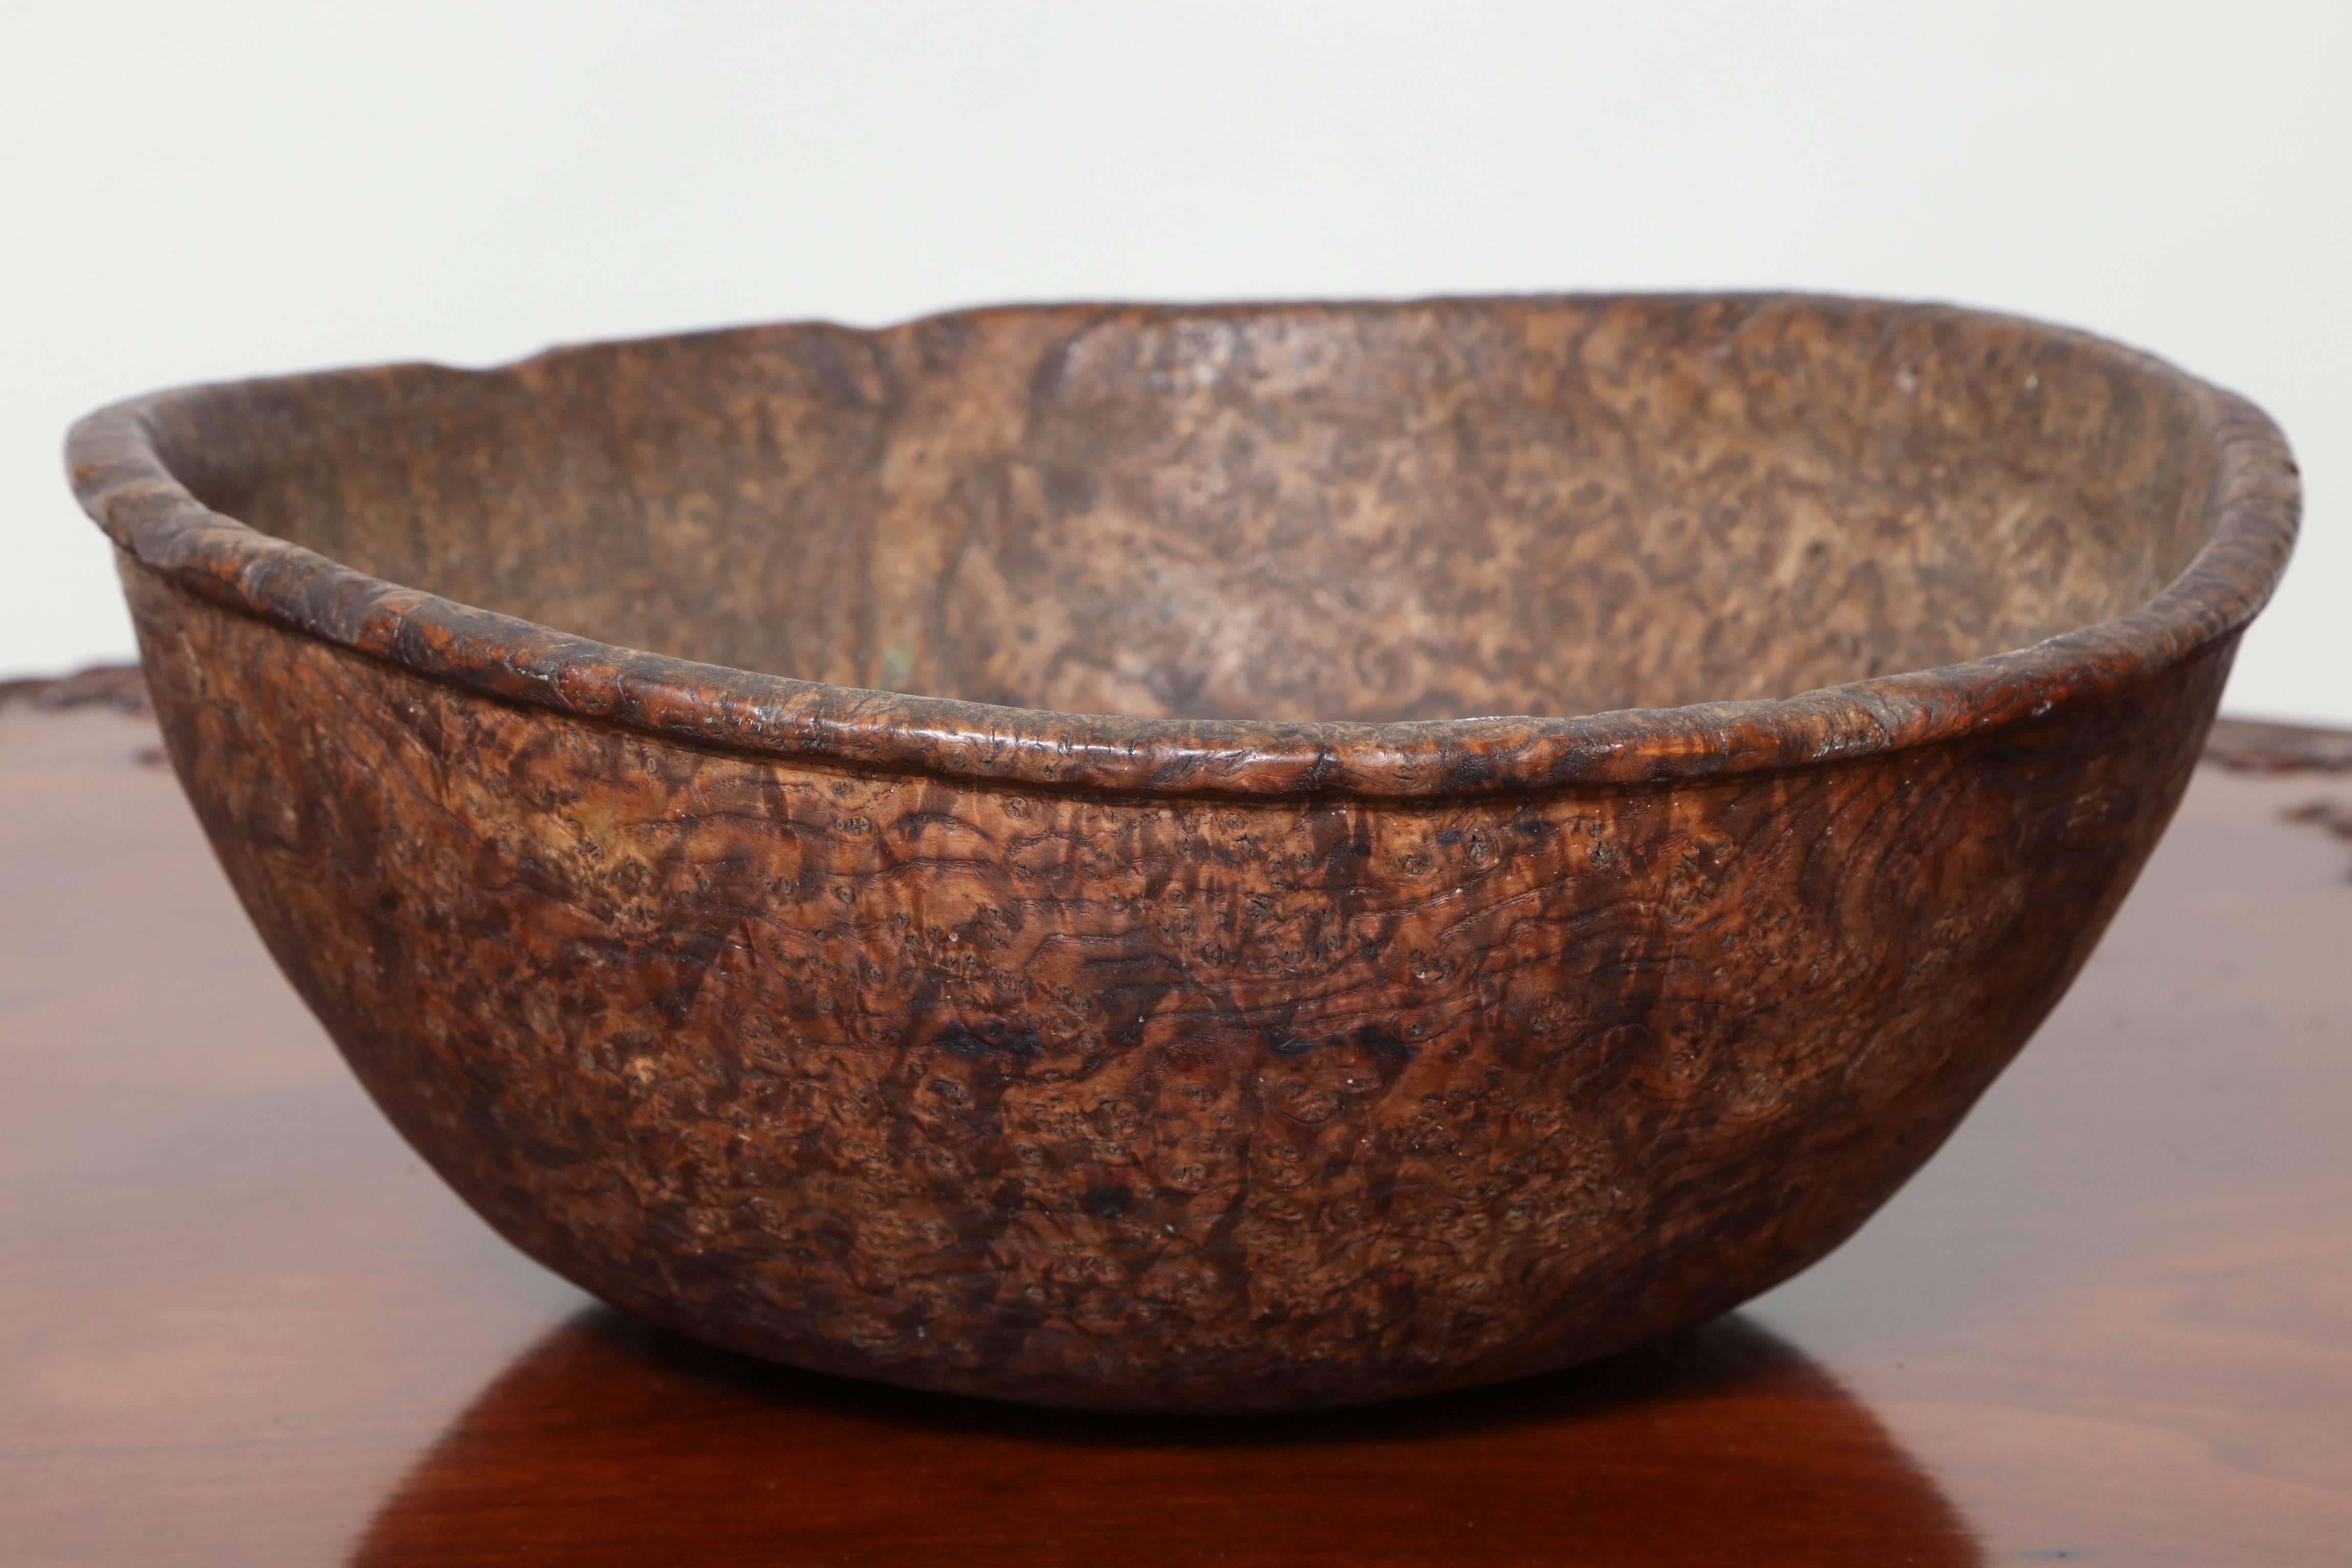 Rare 18th century American burl bowl with lipped edge, the body with fine and profuse burl grain and in lovely untouched, dry surface.